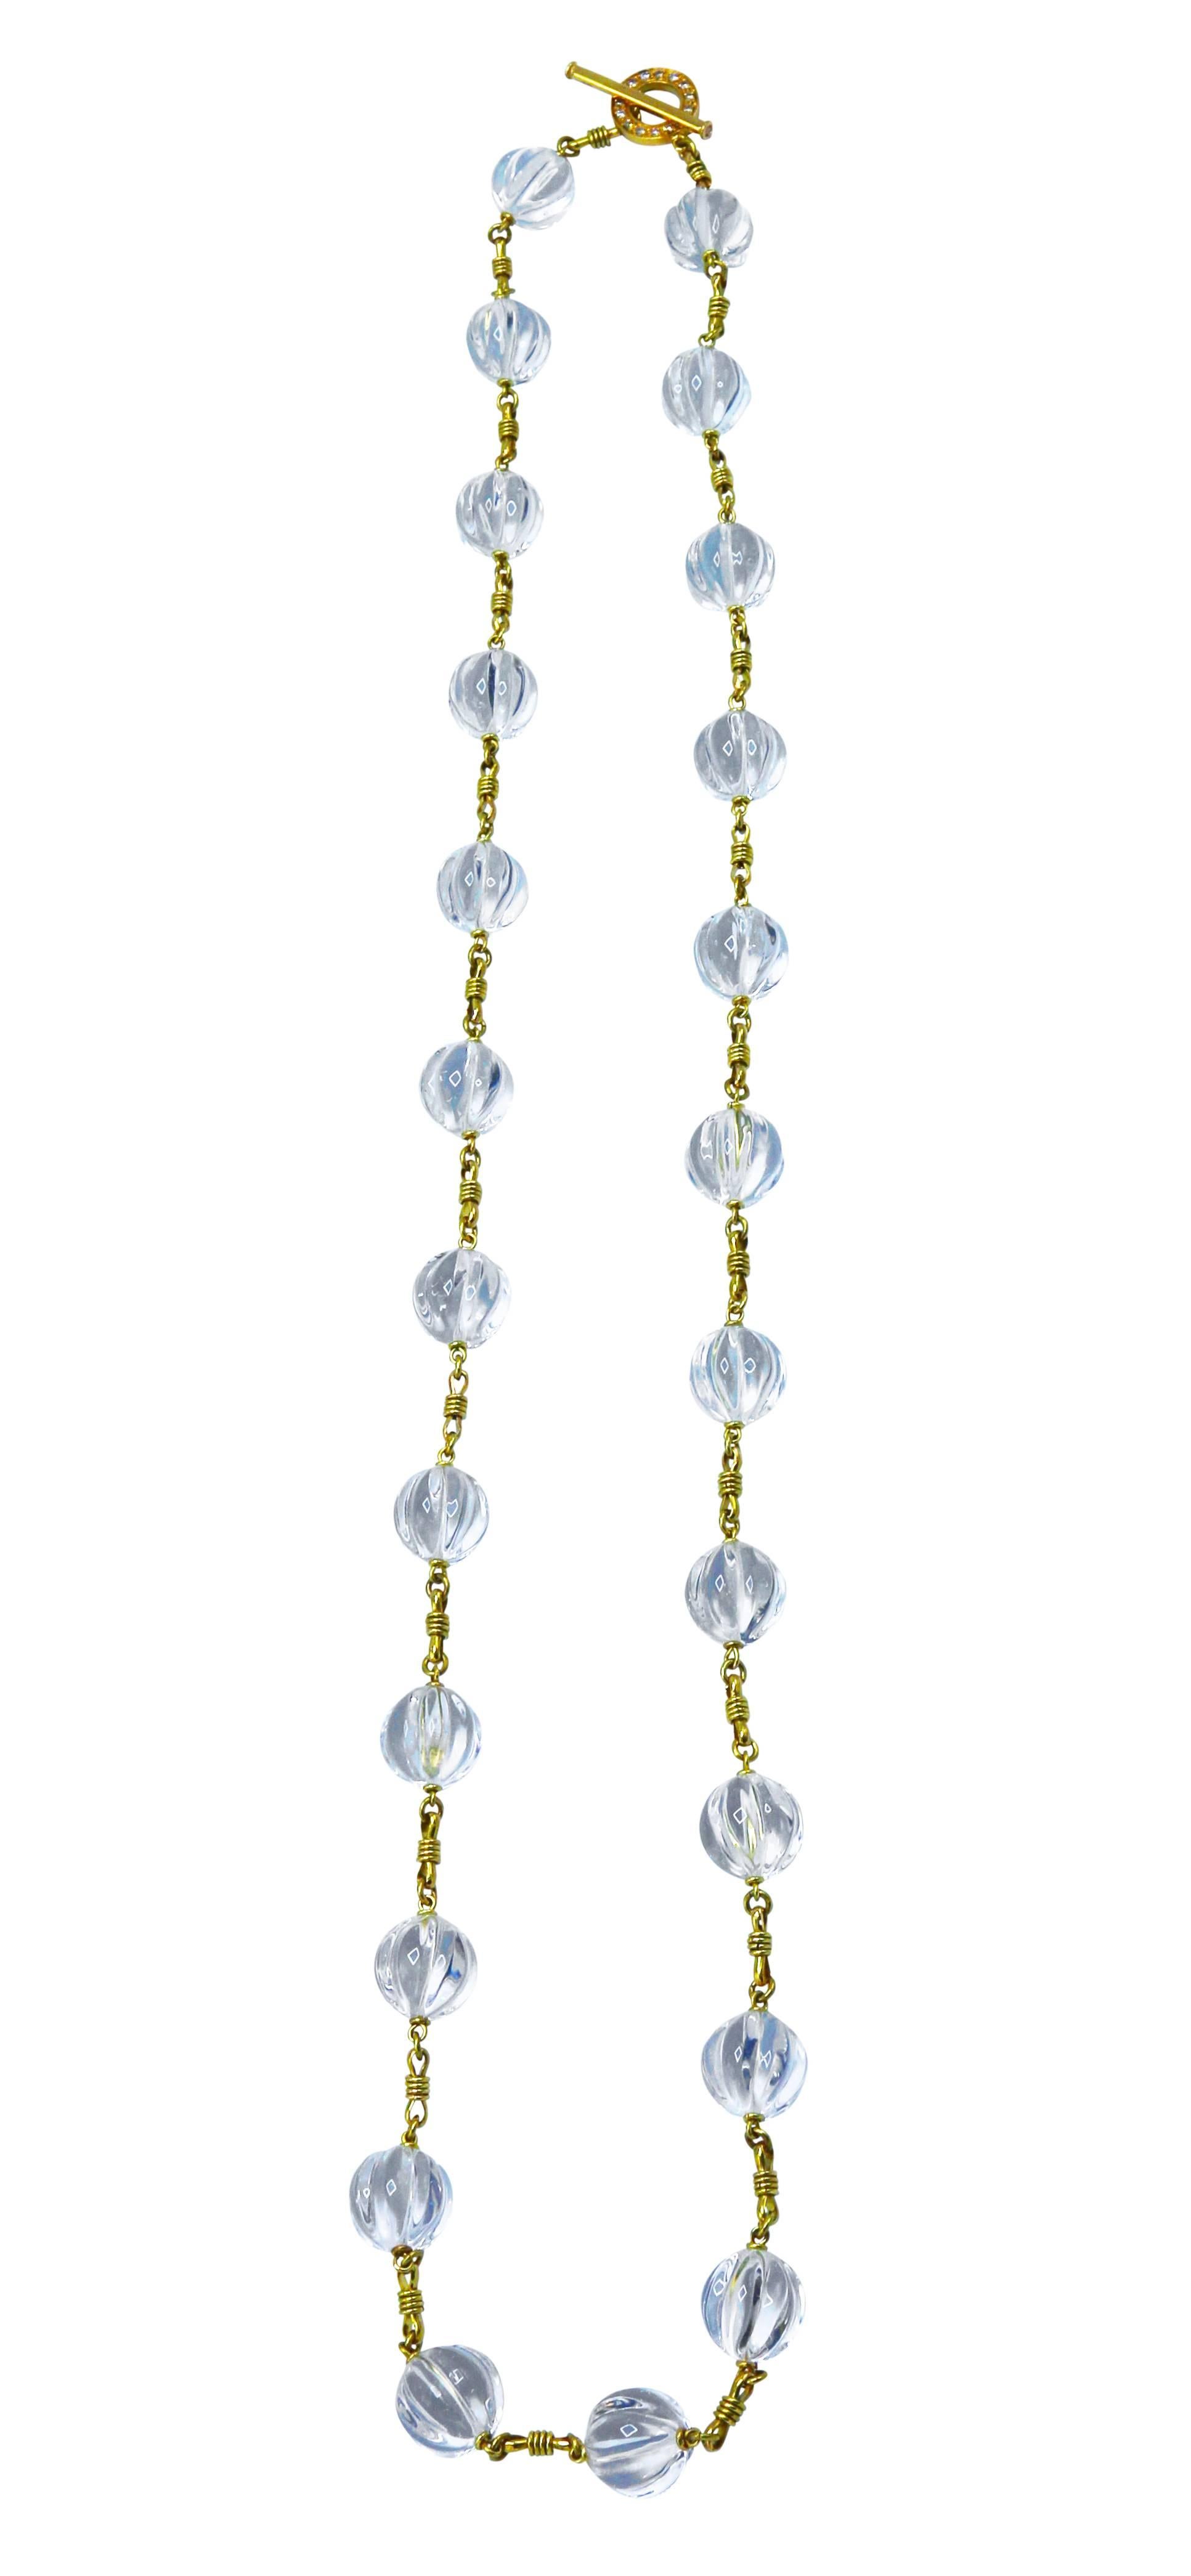 Wonderful handmade rock crystal, diamond and 18 karat gold necklace, composed of a series of carved rock crystal beads, alternating with hand-twisted gold links, completed by a circular clasp set with round diamonds weighing approximately 0.40